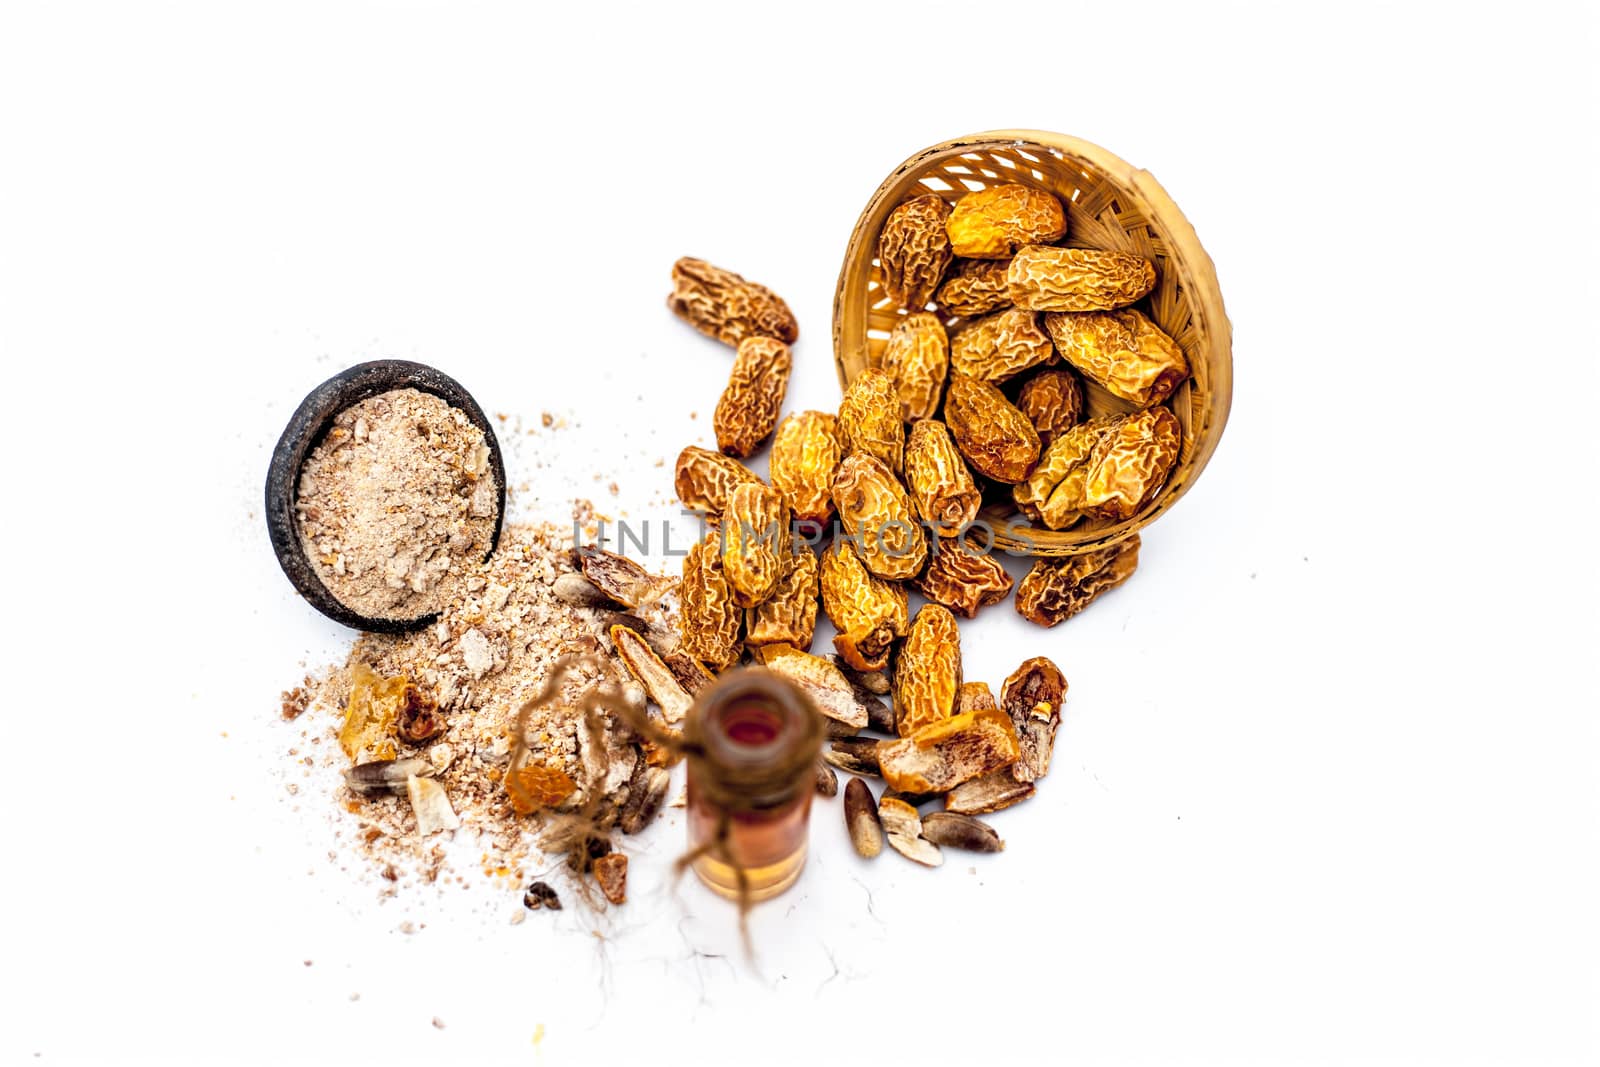 Essential oil of kharek of dried dates or sukhi khajoor or Phoenix dactylifera in a transparent glass bottle isolated on white with raw dried dates and its powder.